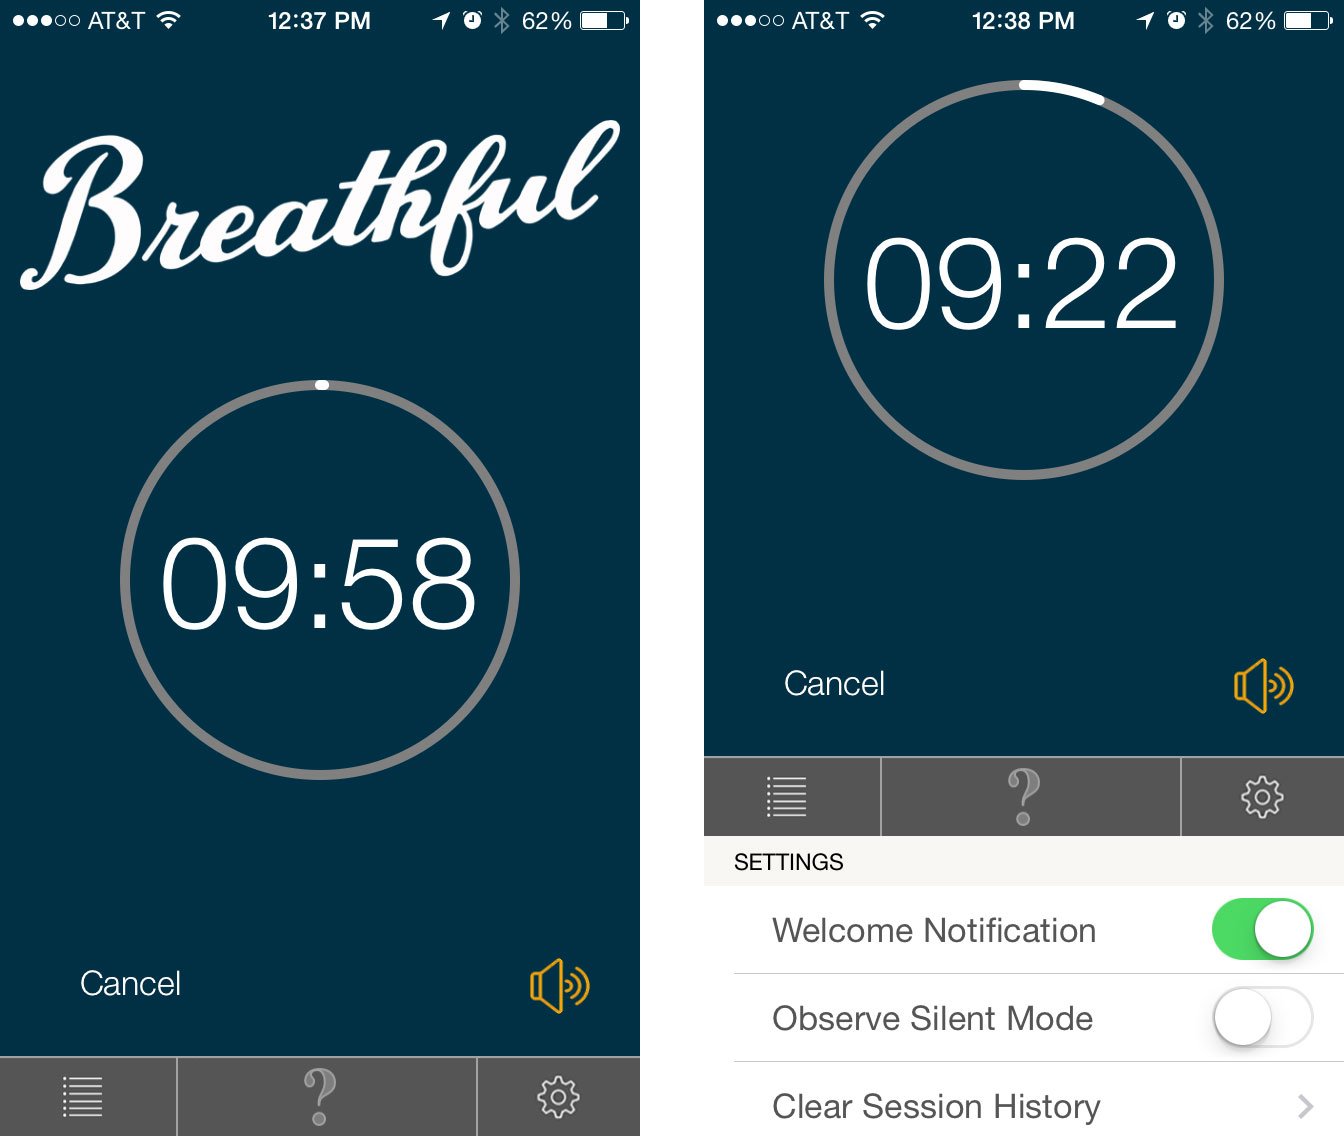 Best meditation apps for iPhone: Breathful